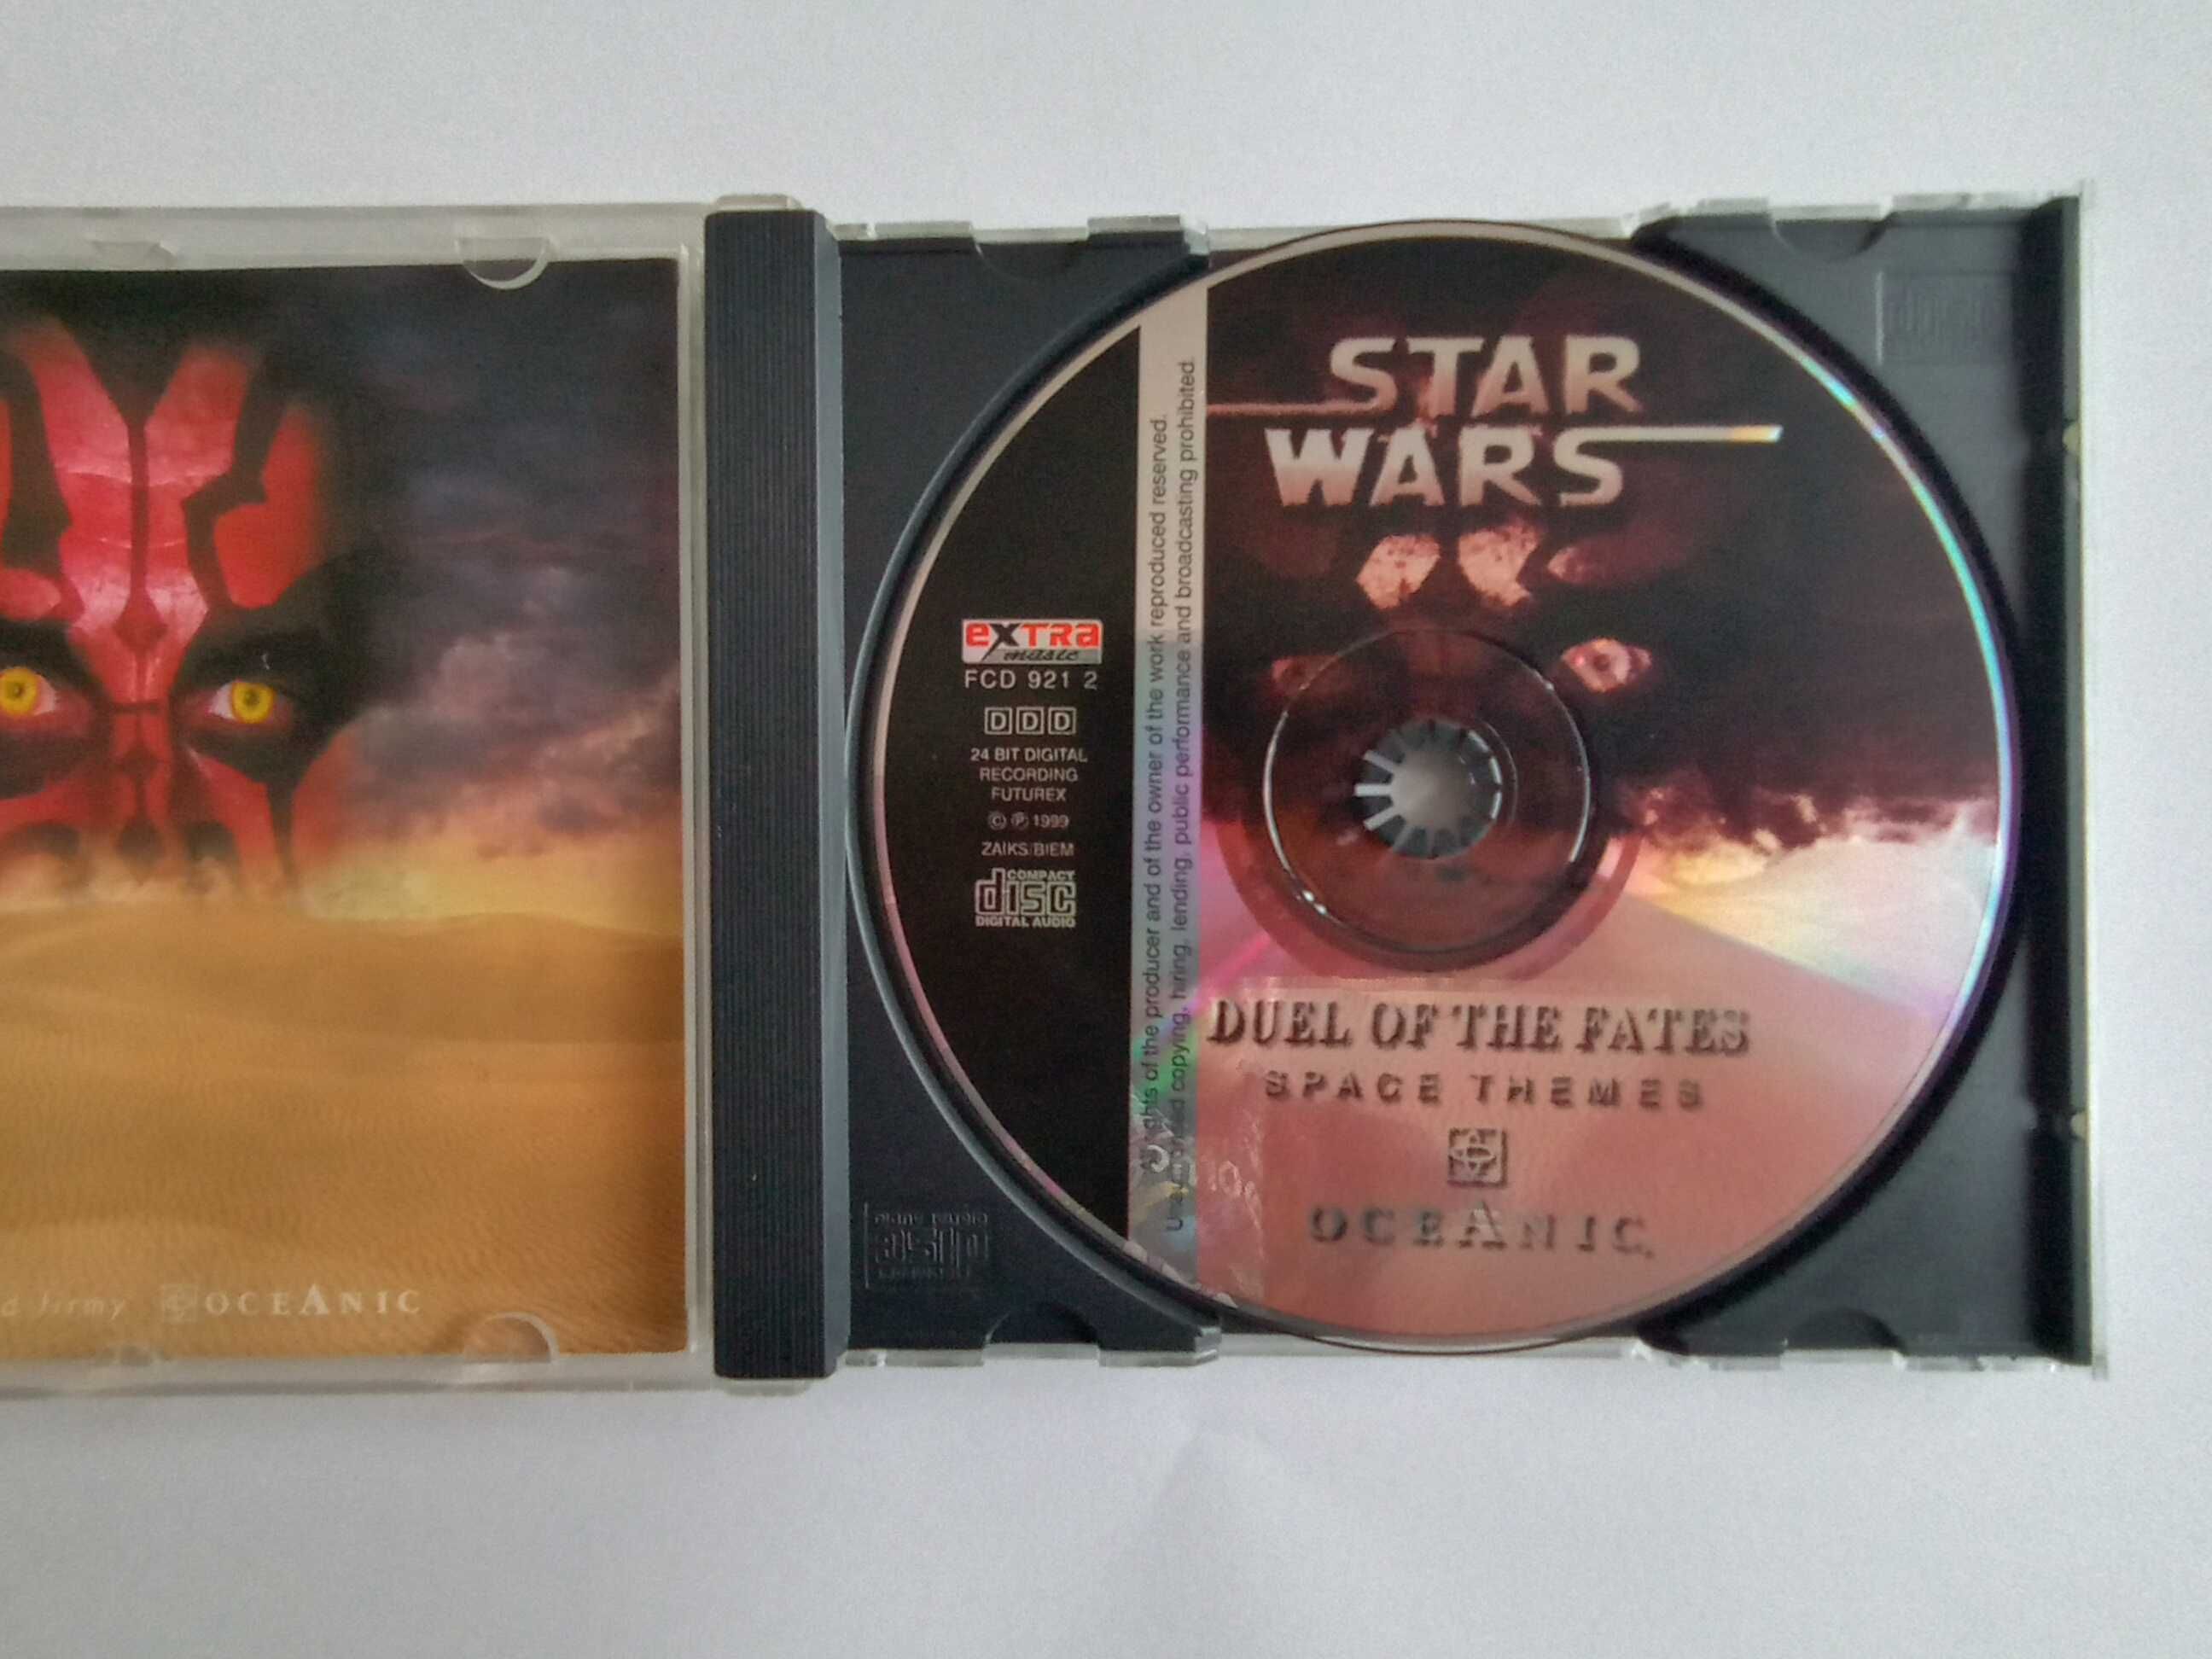 Star Wars, Space Themes Duel of the Fates, CD